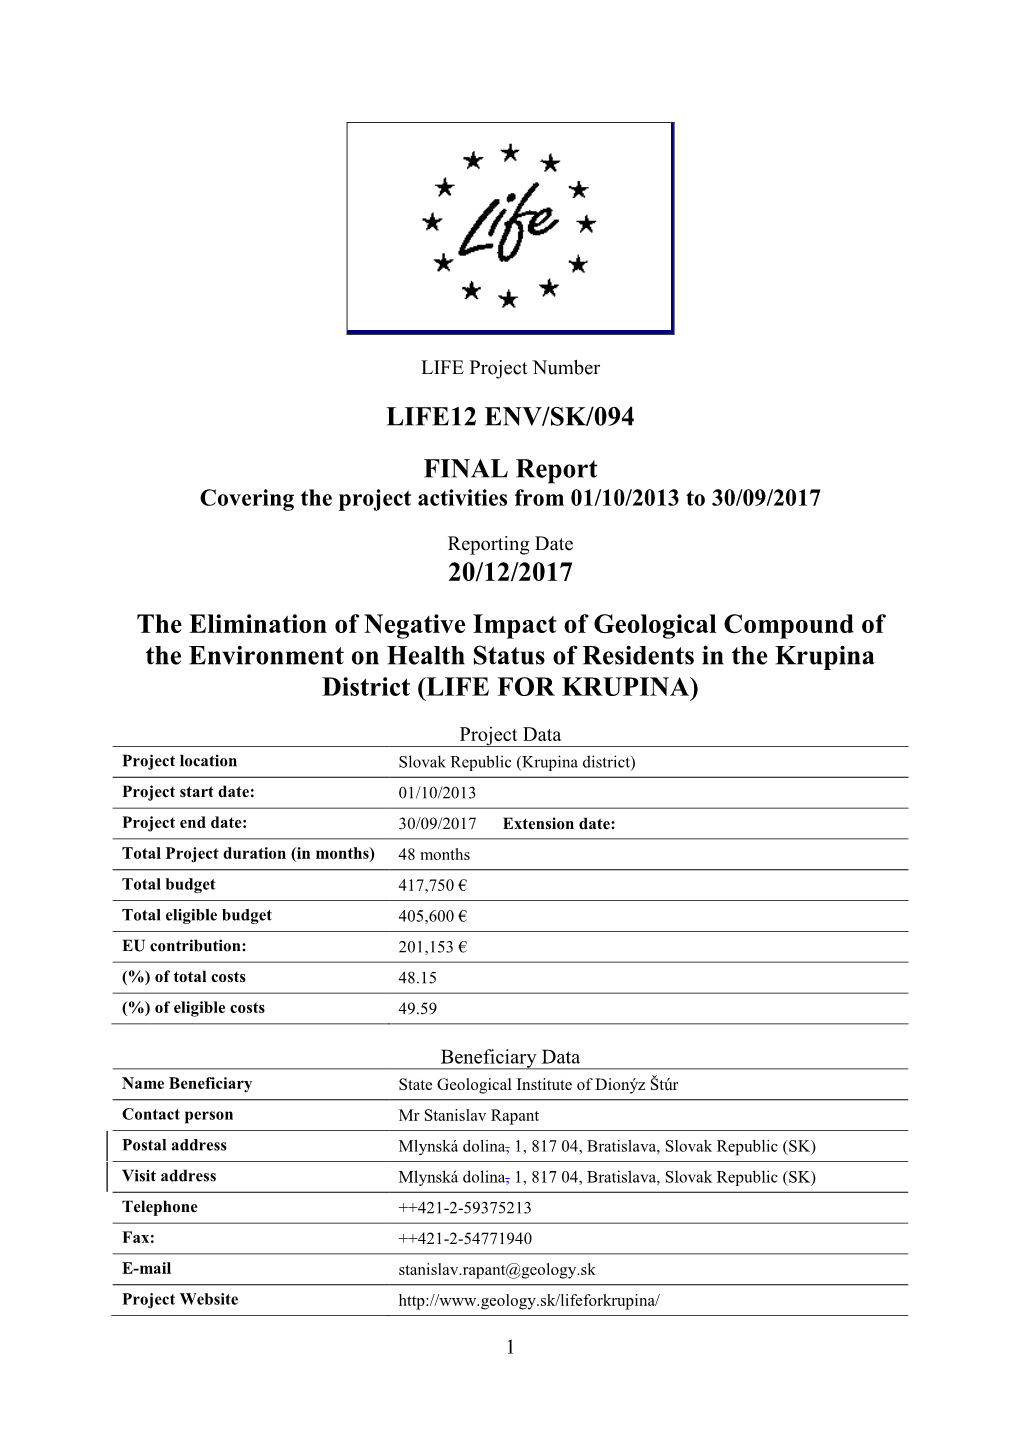 LIFE12 ENV/SK/094 FINAL Report 20/12/2017 the Elimination Of